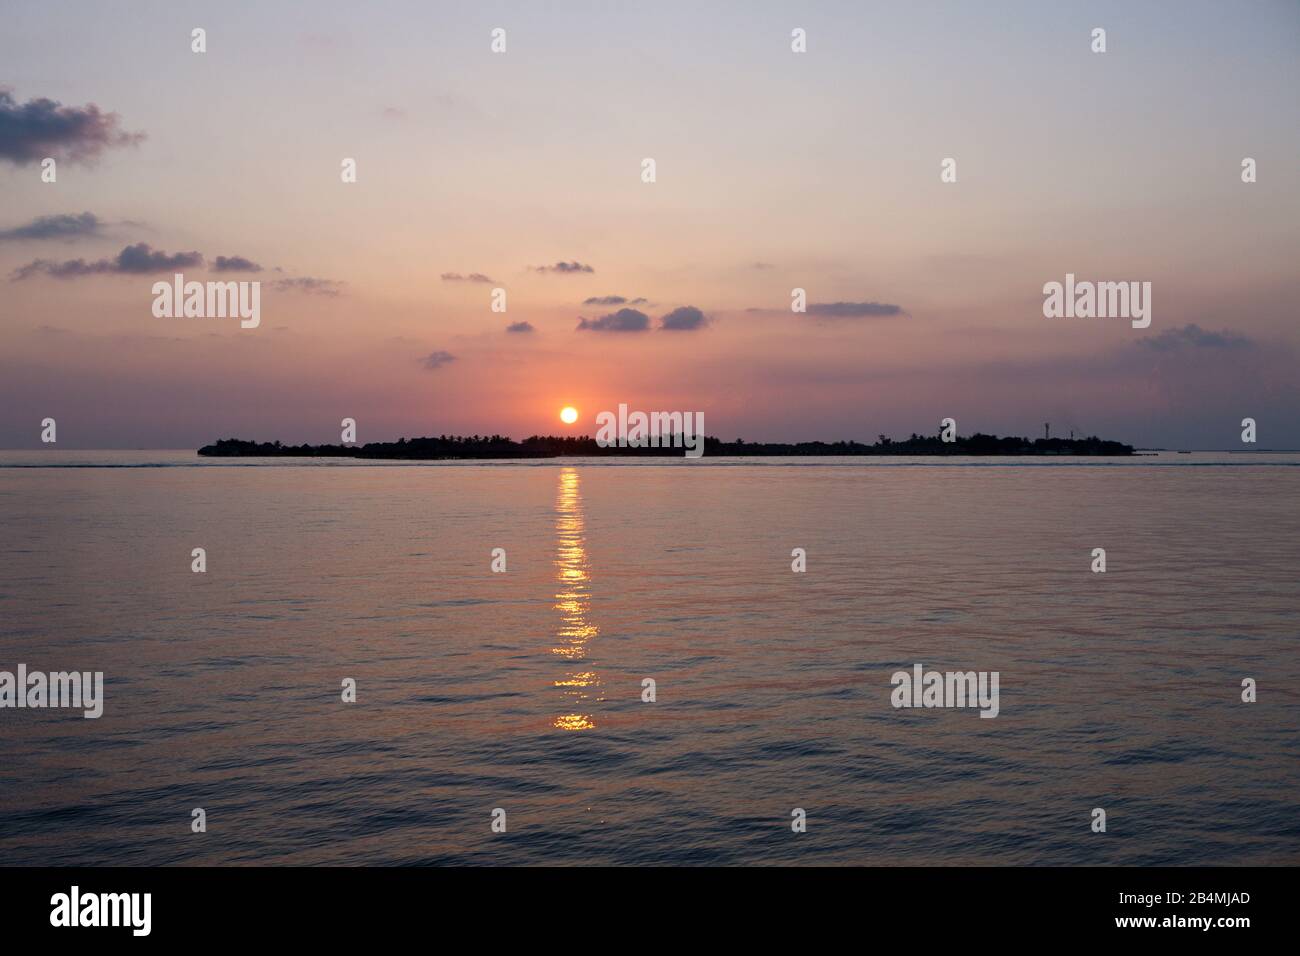 Sunset at South Male Atoll, South Male Atoll, Indian Ocean, Maldives Stock Photo